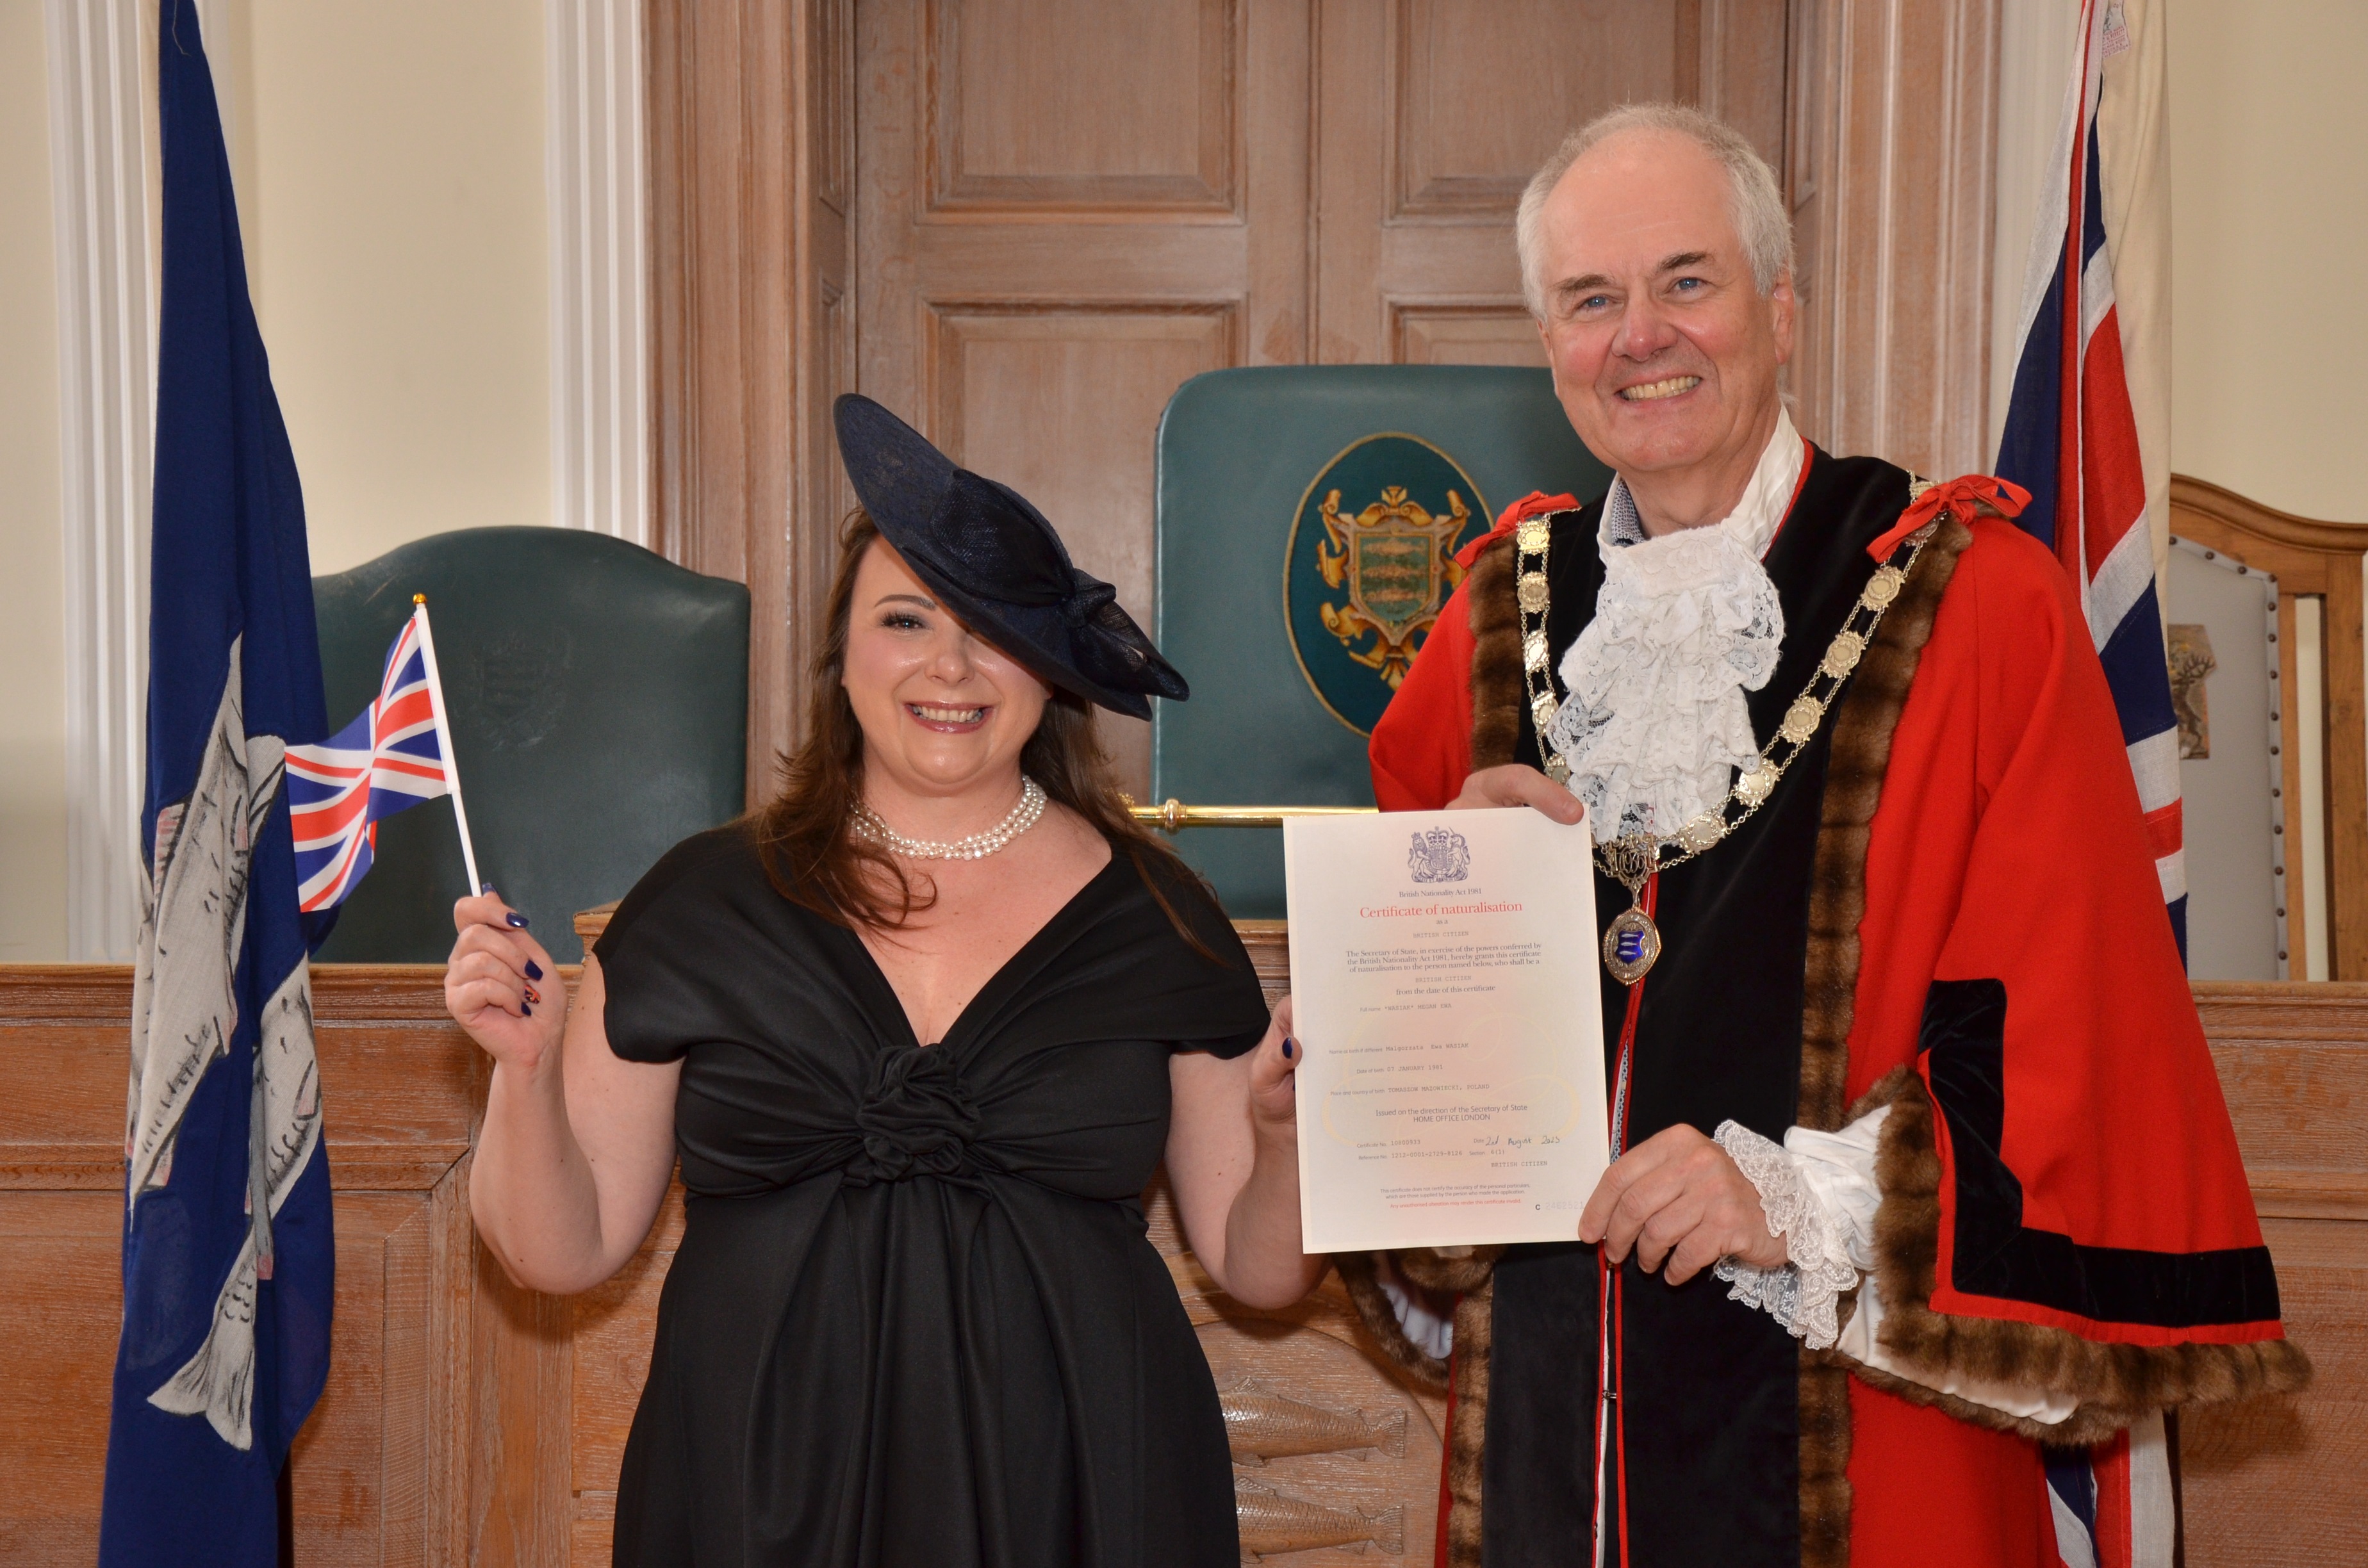 The Mayor presenting a citizenship certificate to a lady wearing a black dress and waving the british flag